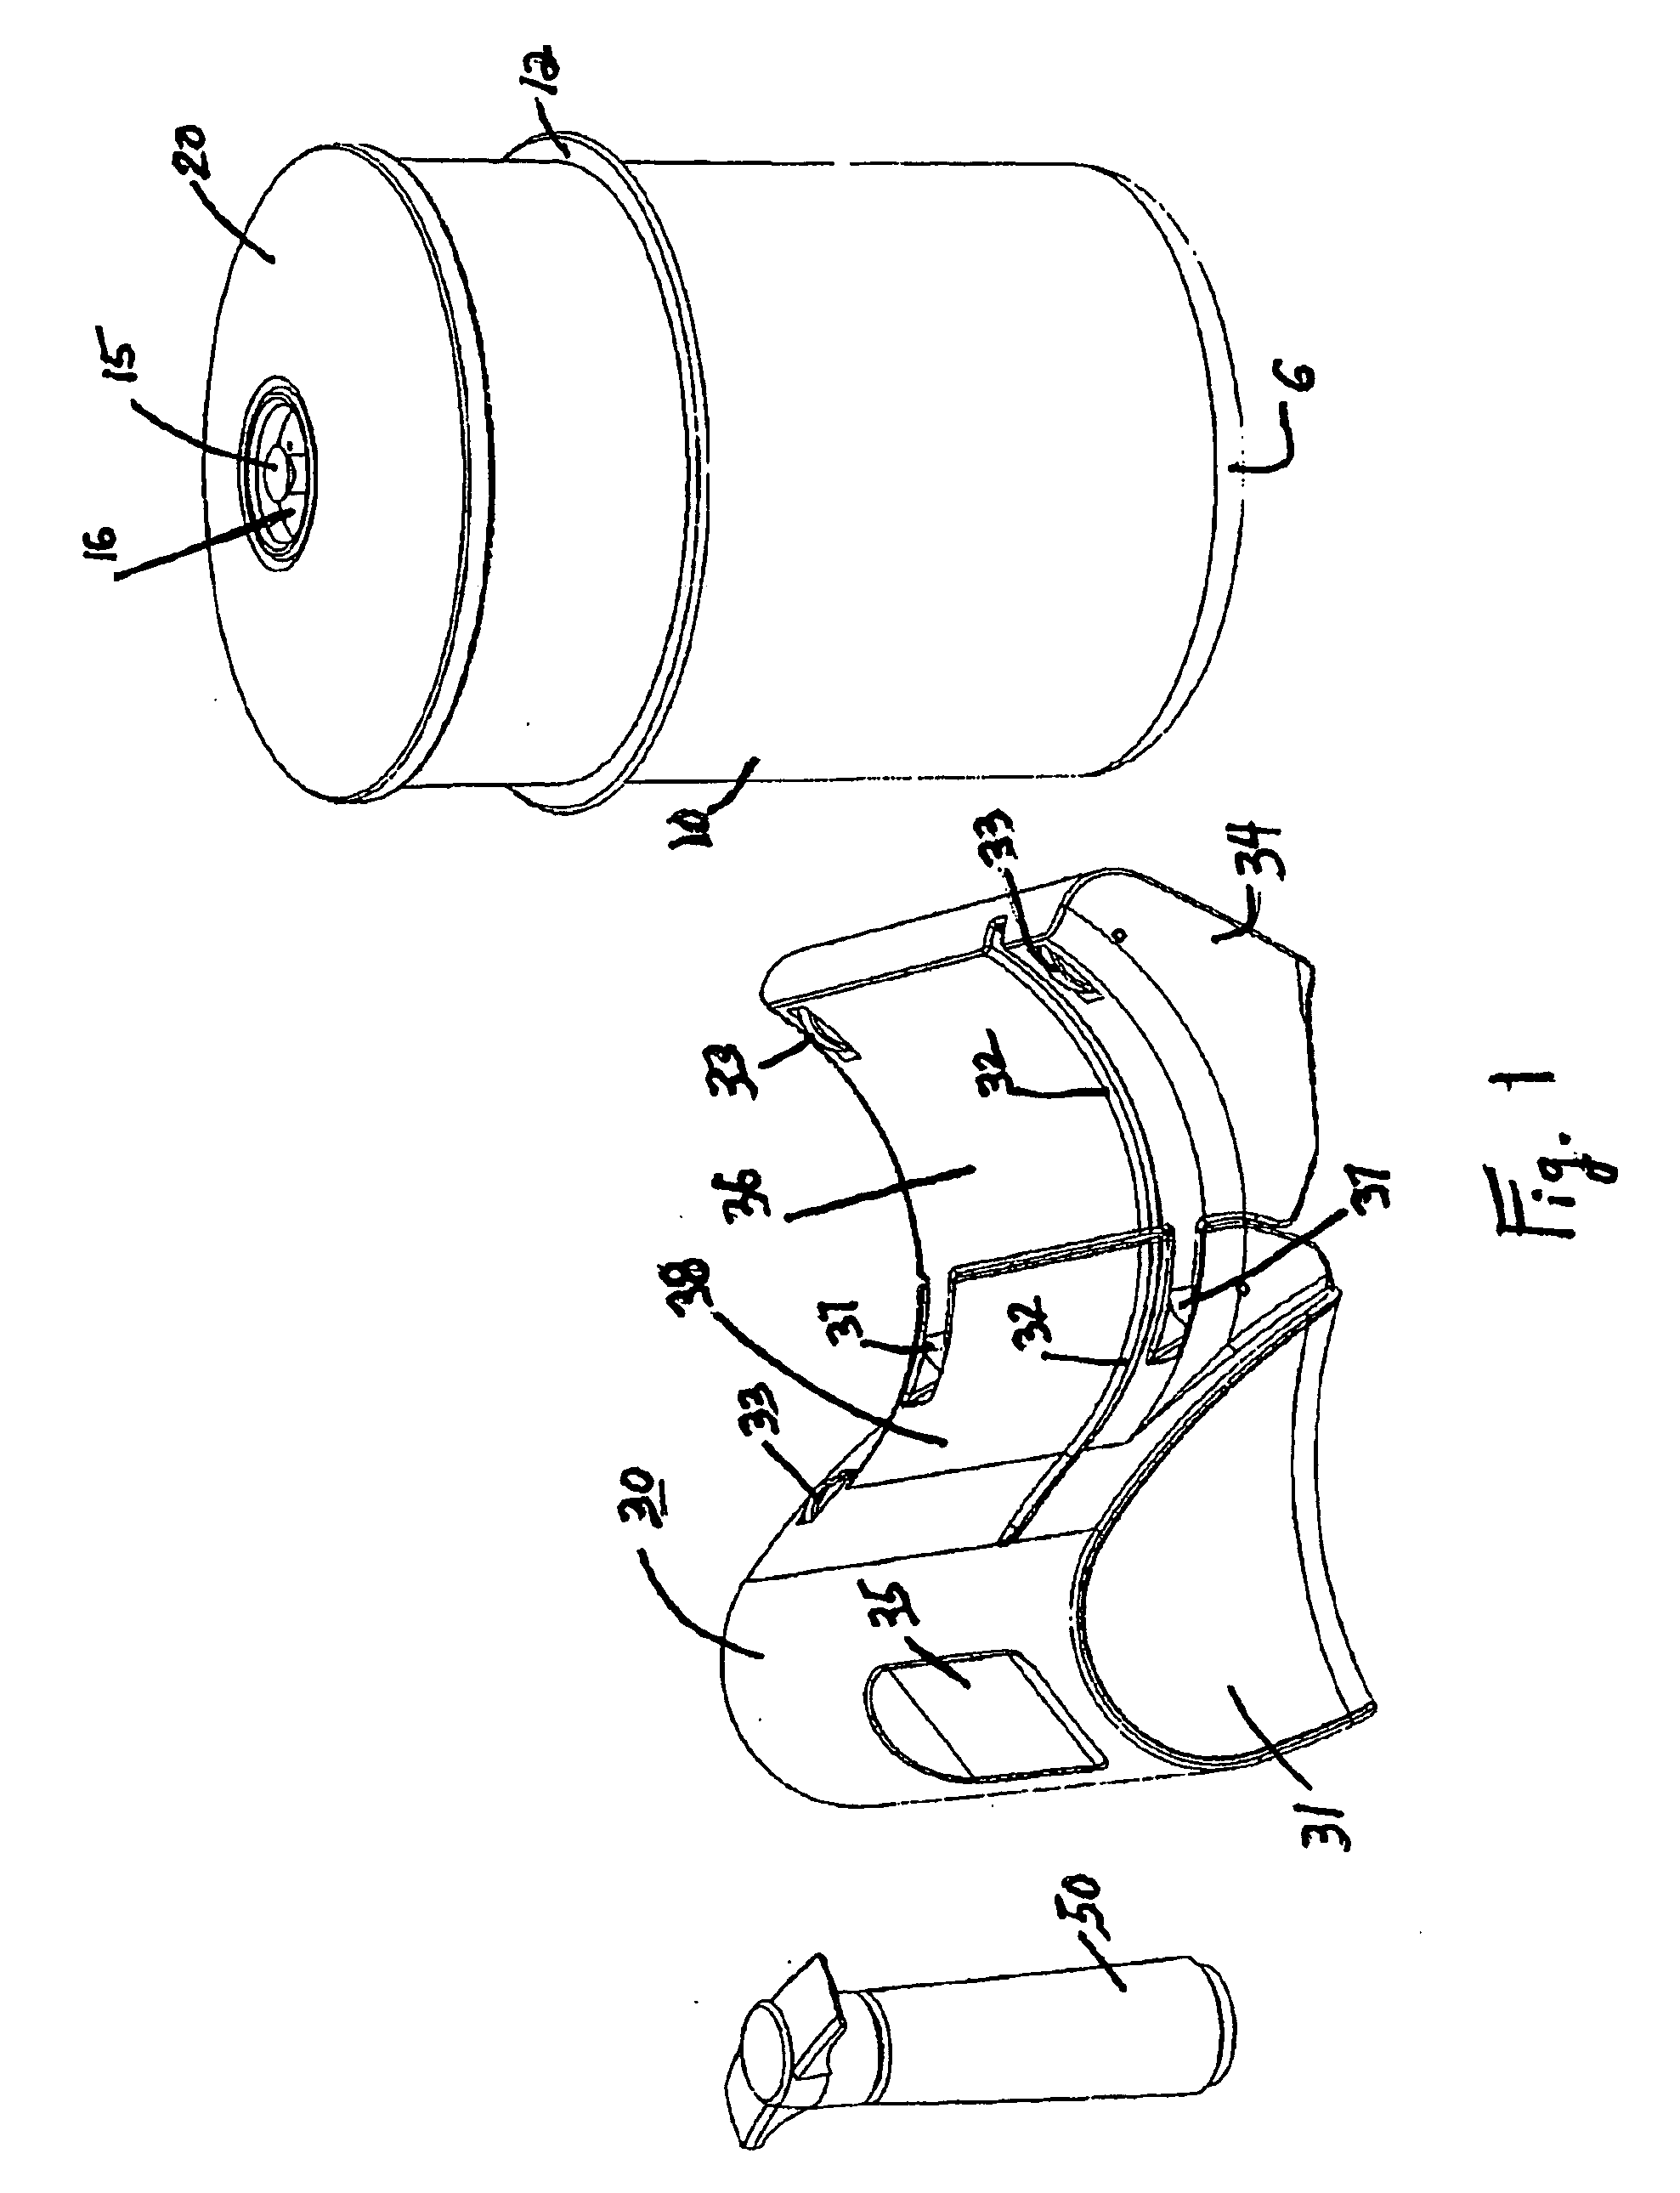 Compact apparatus for marinating and tenderizing meat